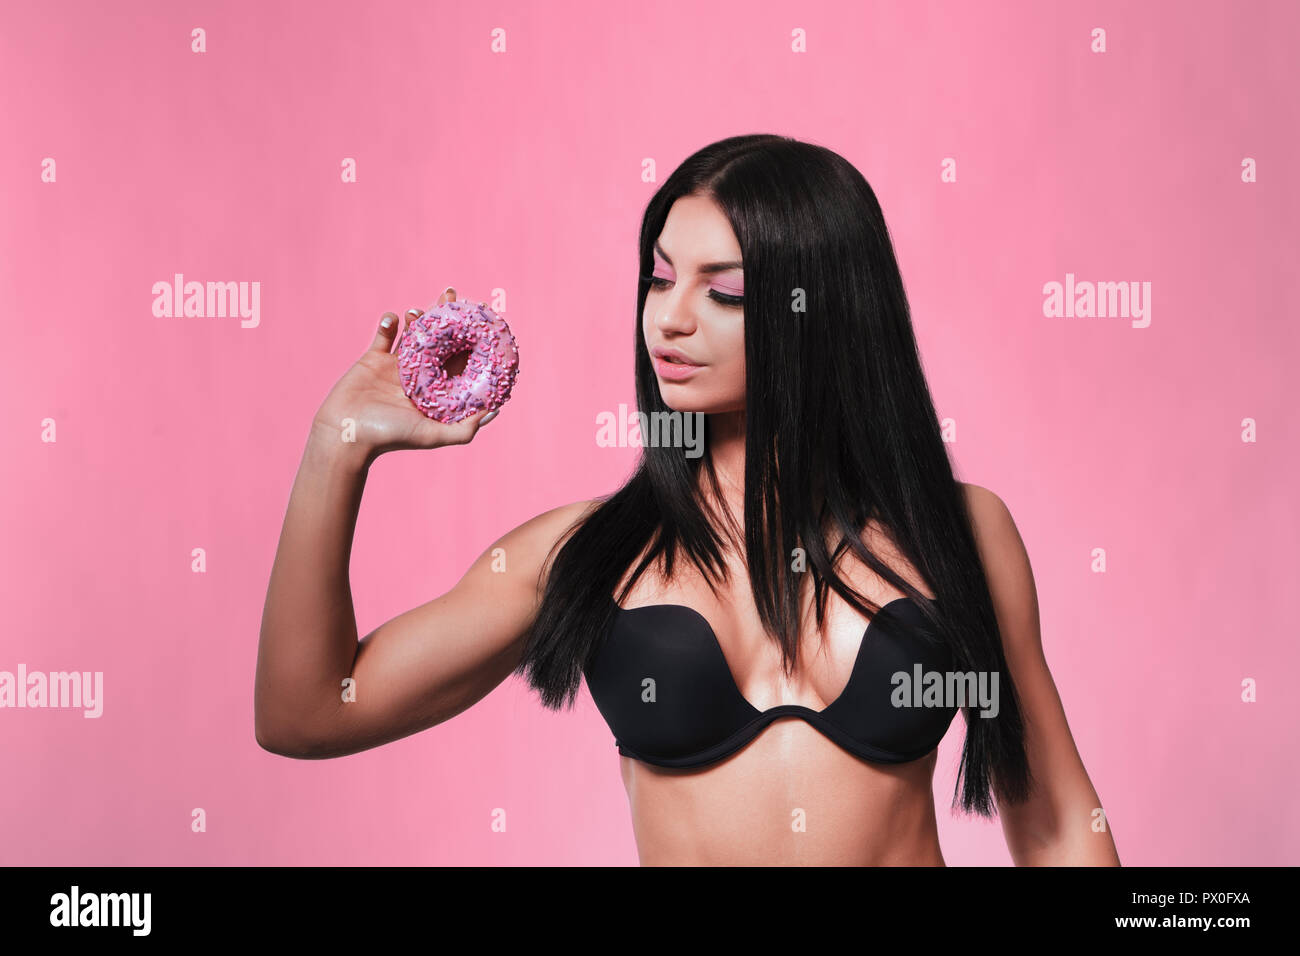 Beauty fashion model girl taking colorful donuts Stock Photo